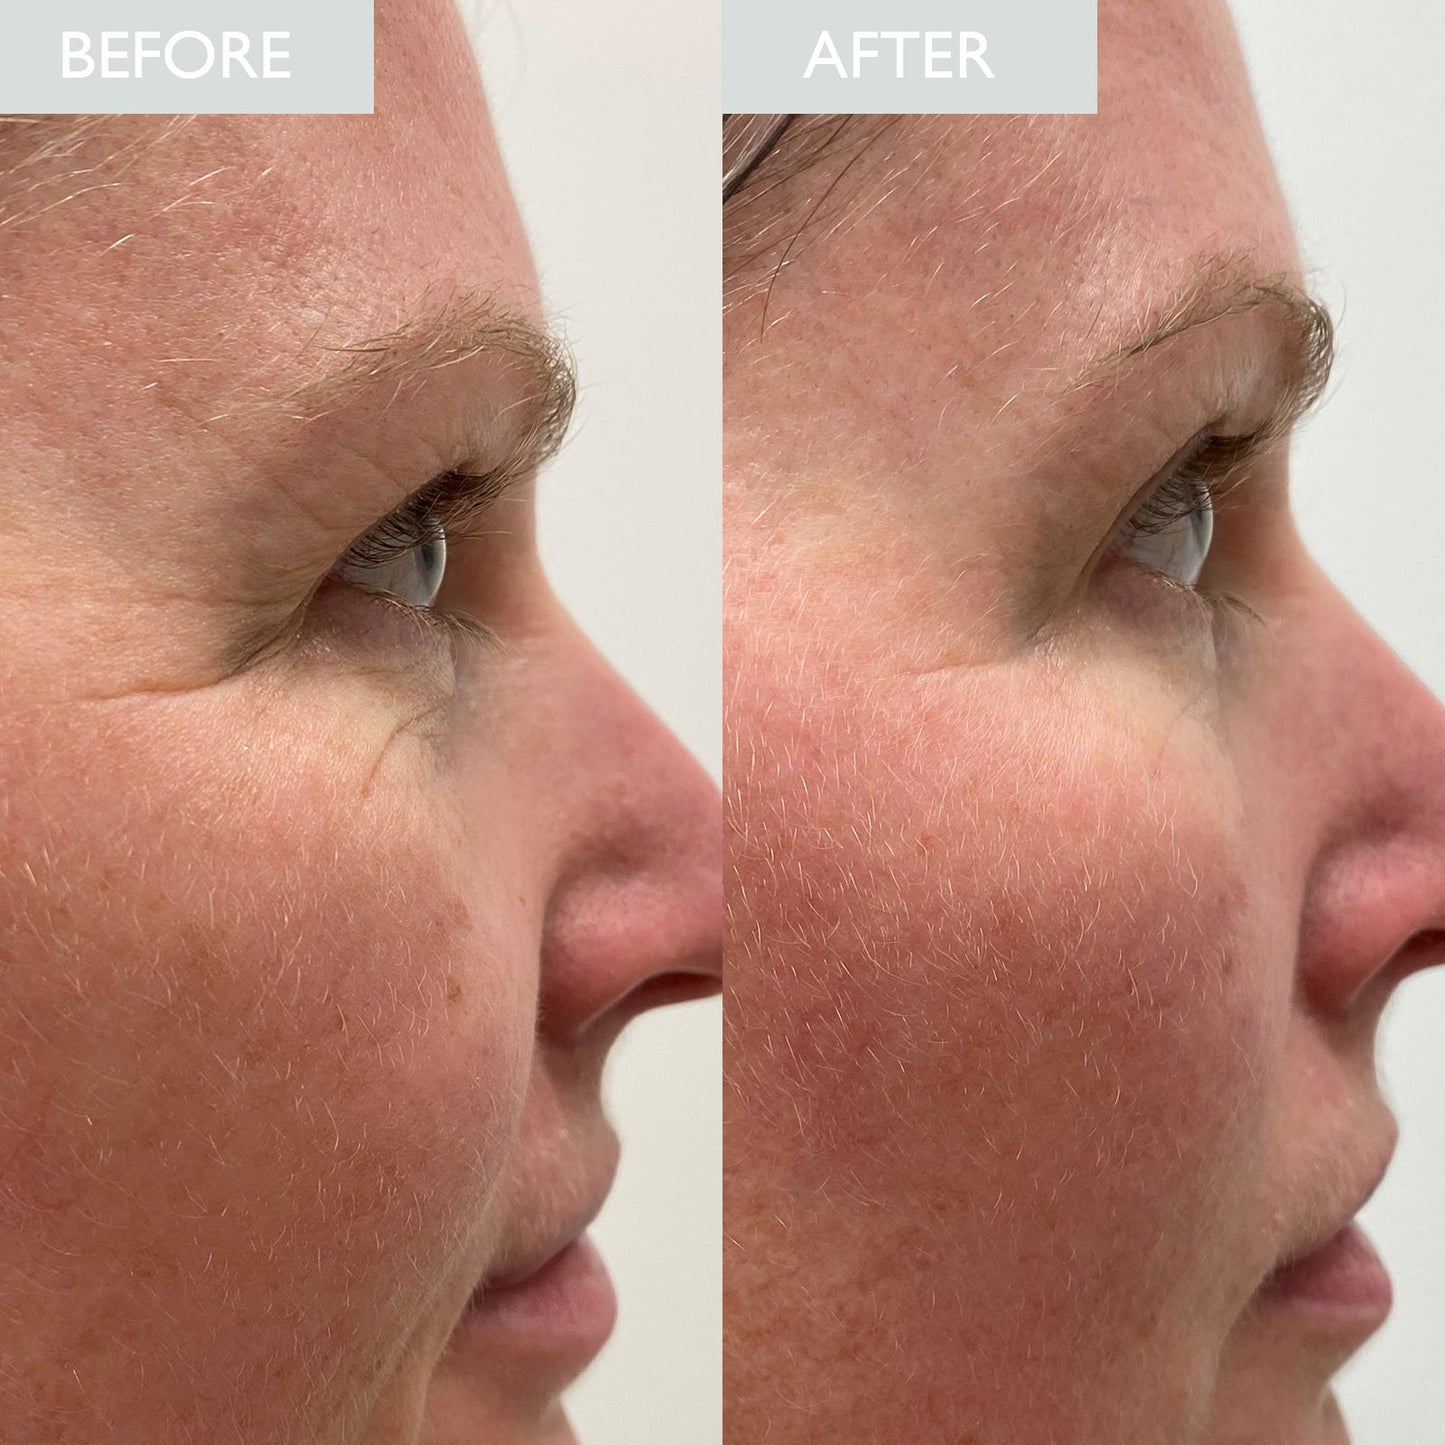 An image of a woman showing before and after - demonstrating a reduction in lines and darkness around eye area